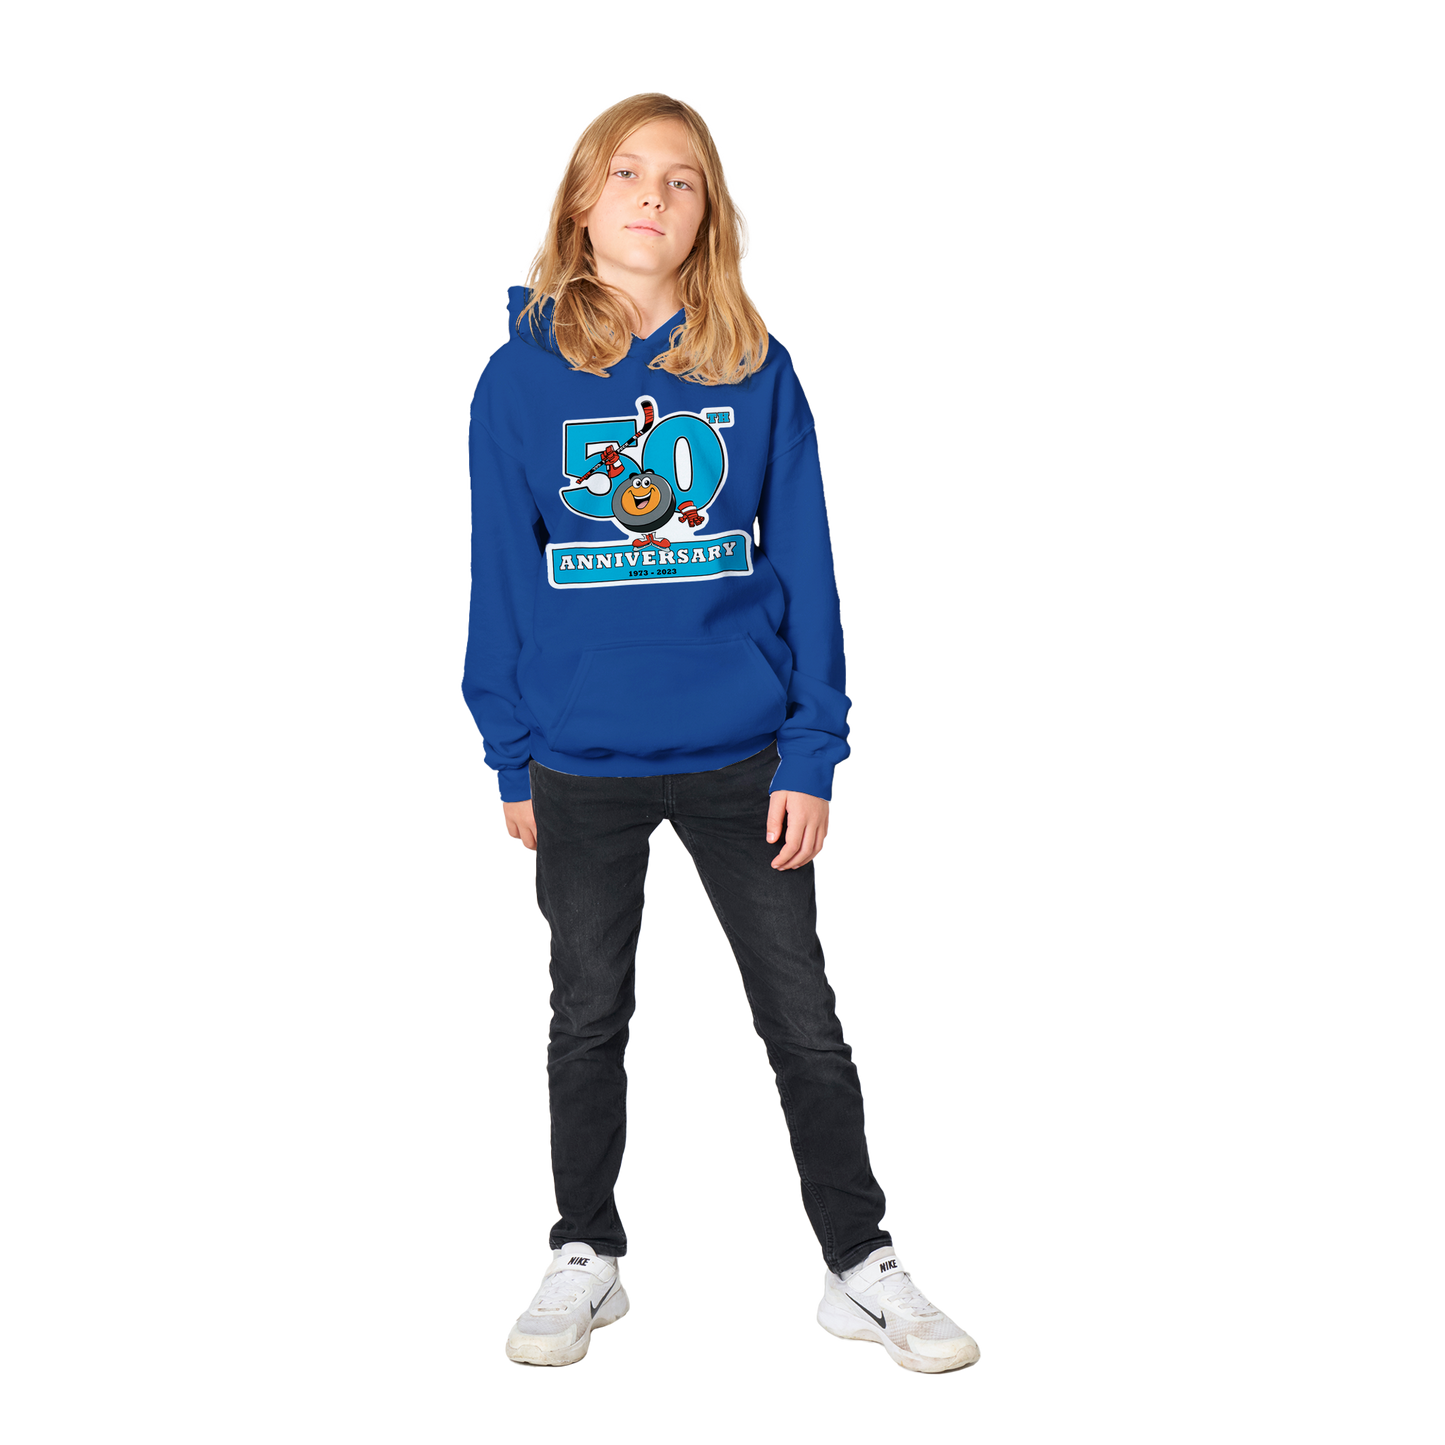 Peter's 50th Anniversary Classic Kids Pullover Hoodie